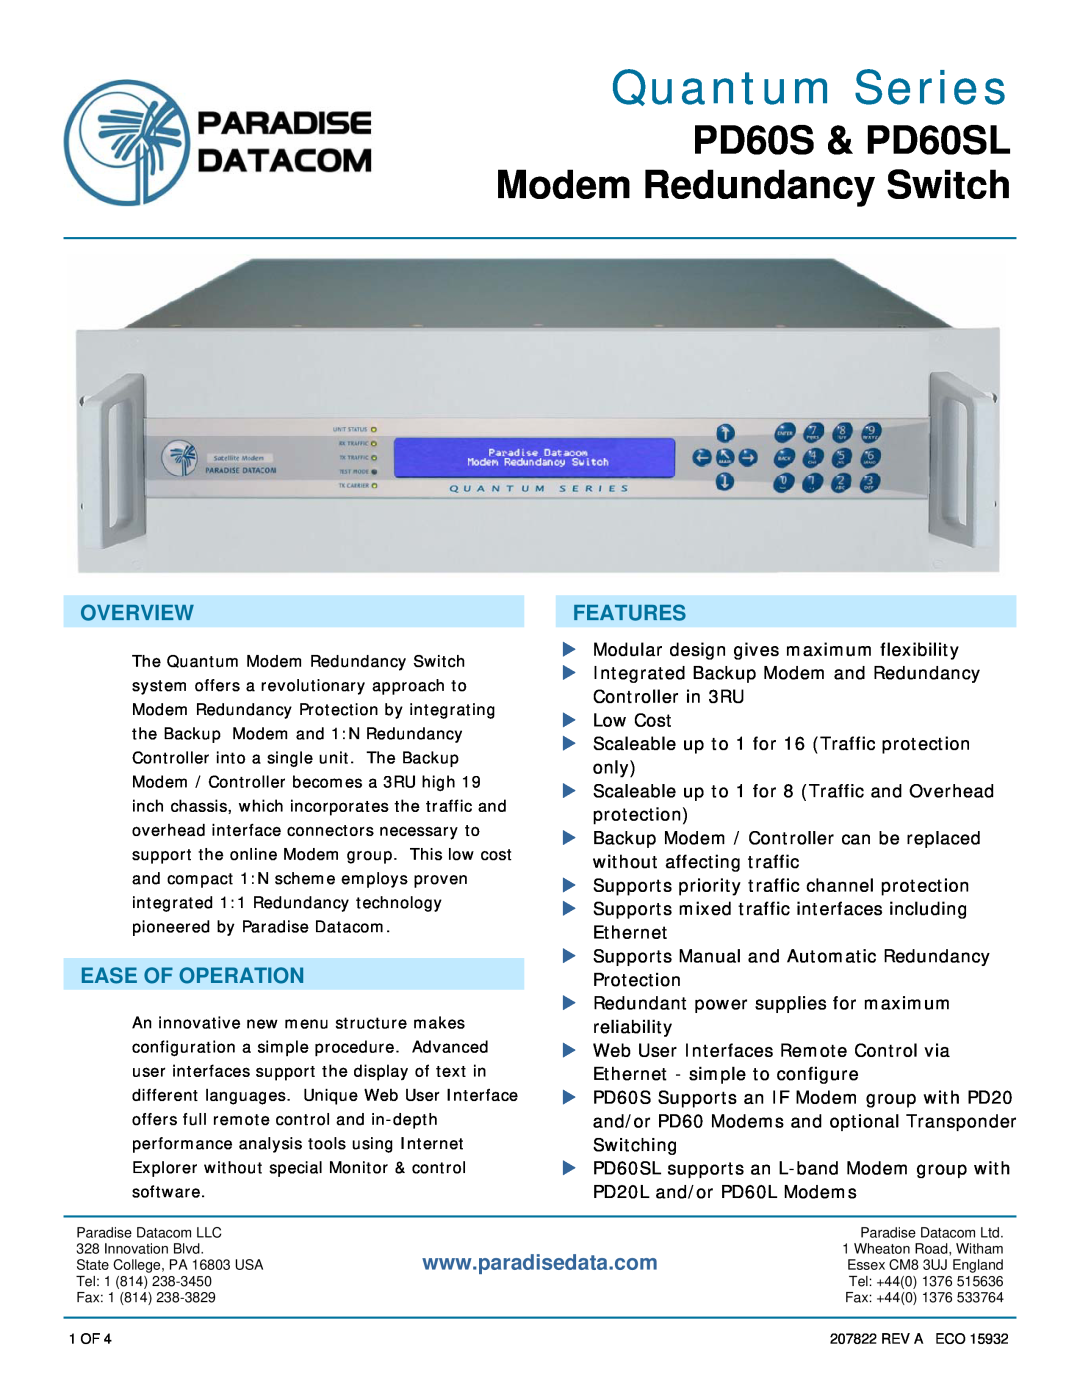 Paradise manual Overview, Ease Of Operation, Features, Quantum Series, PD60S & PD60SL Modem Redundancy Switch 